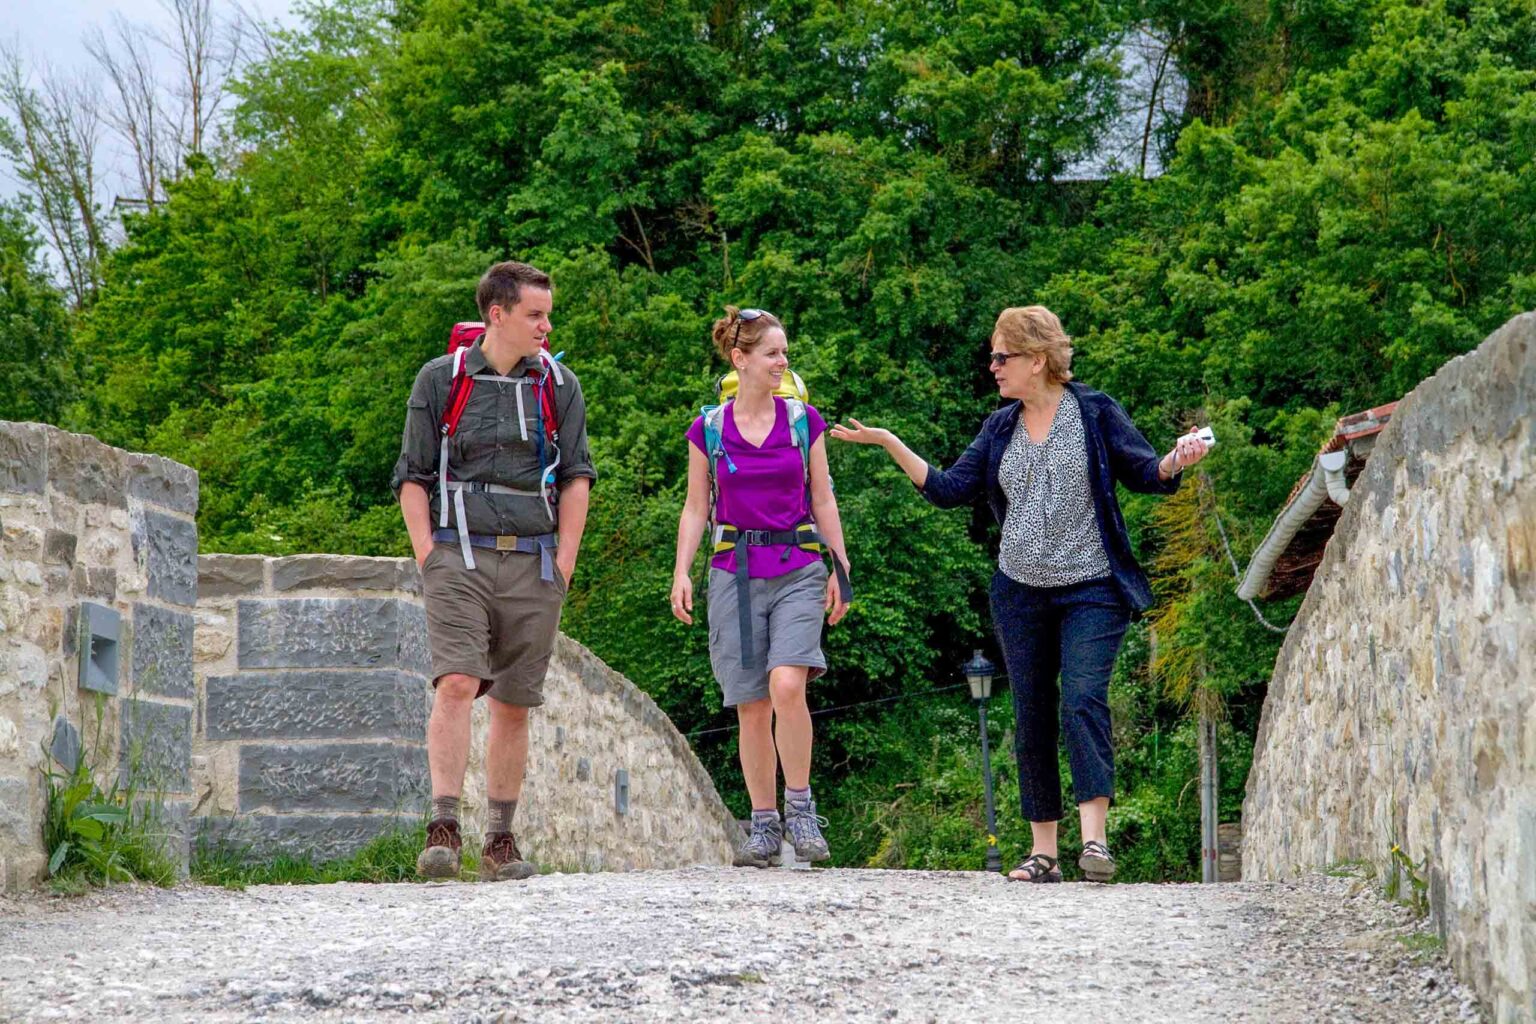 Two hikers and a guide on the St. James route on the Camino de Santiago.